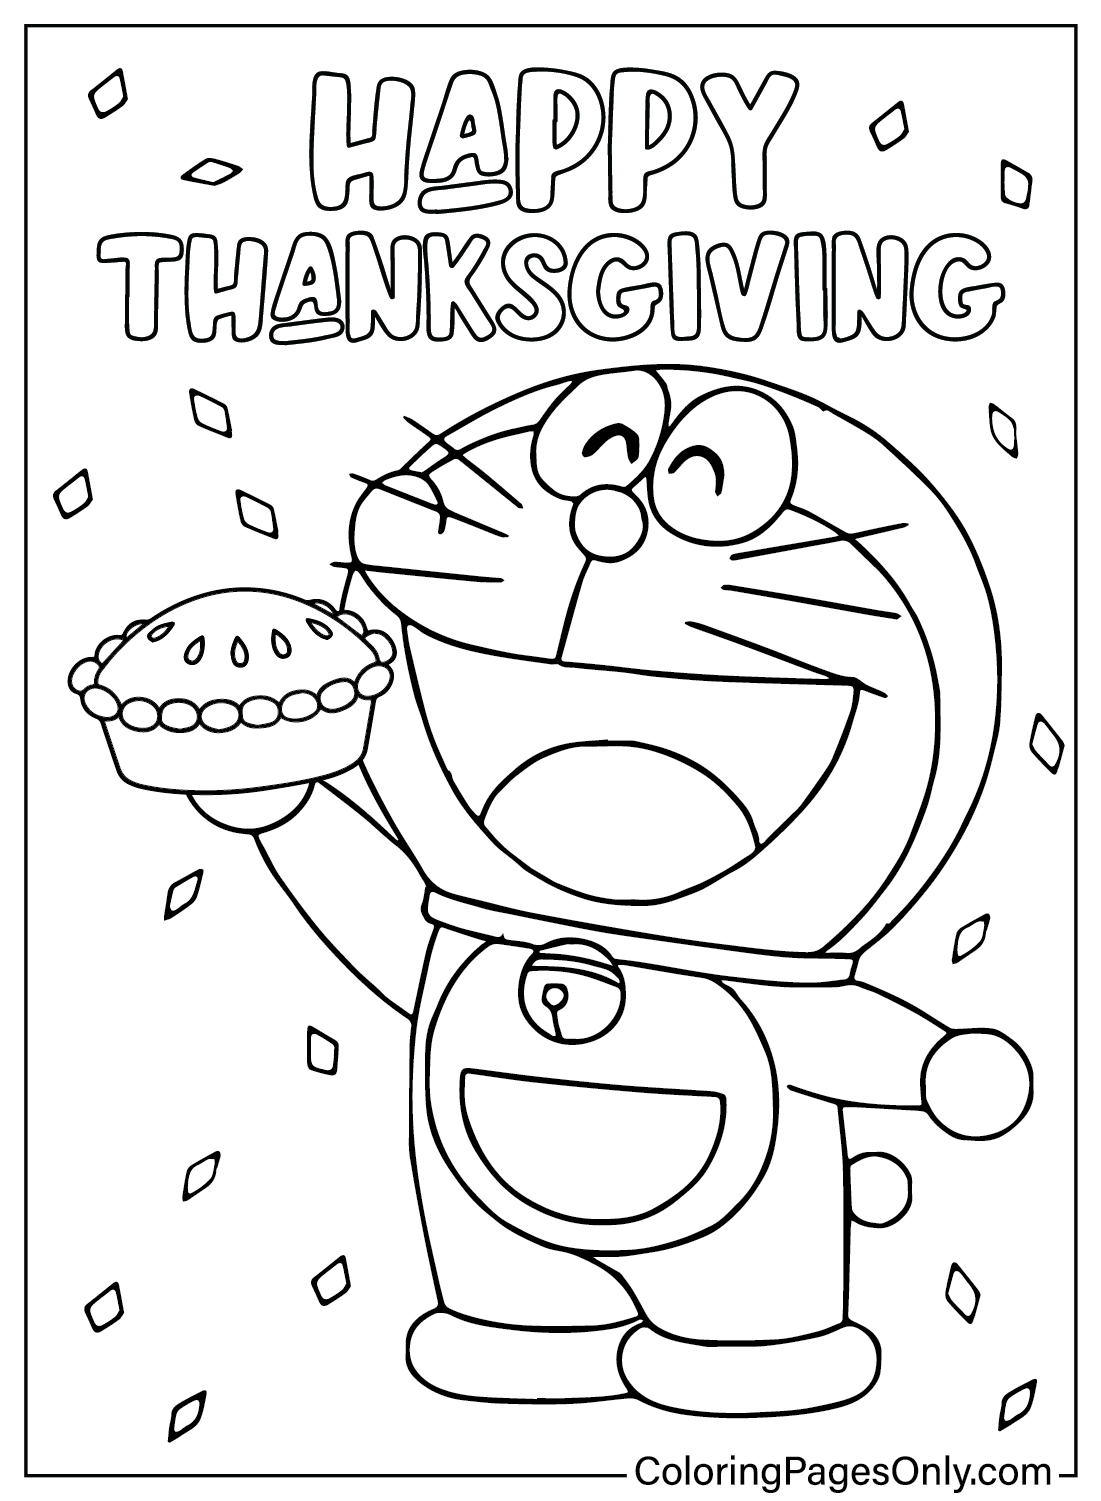 Thanksgiving Doreamon Coloring Page from Thanksgiving Cartoon